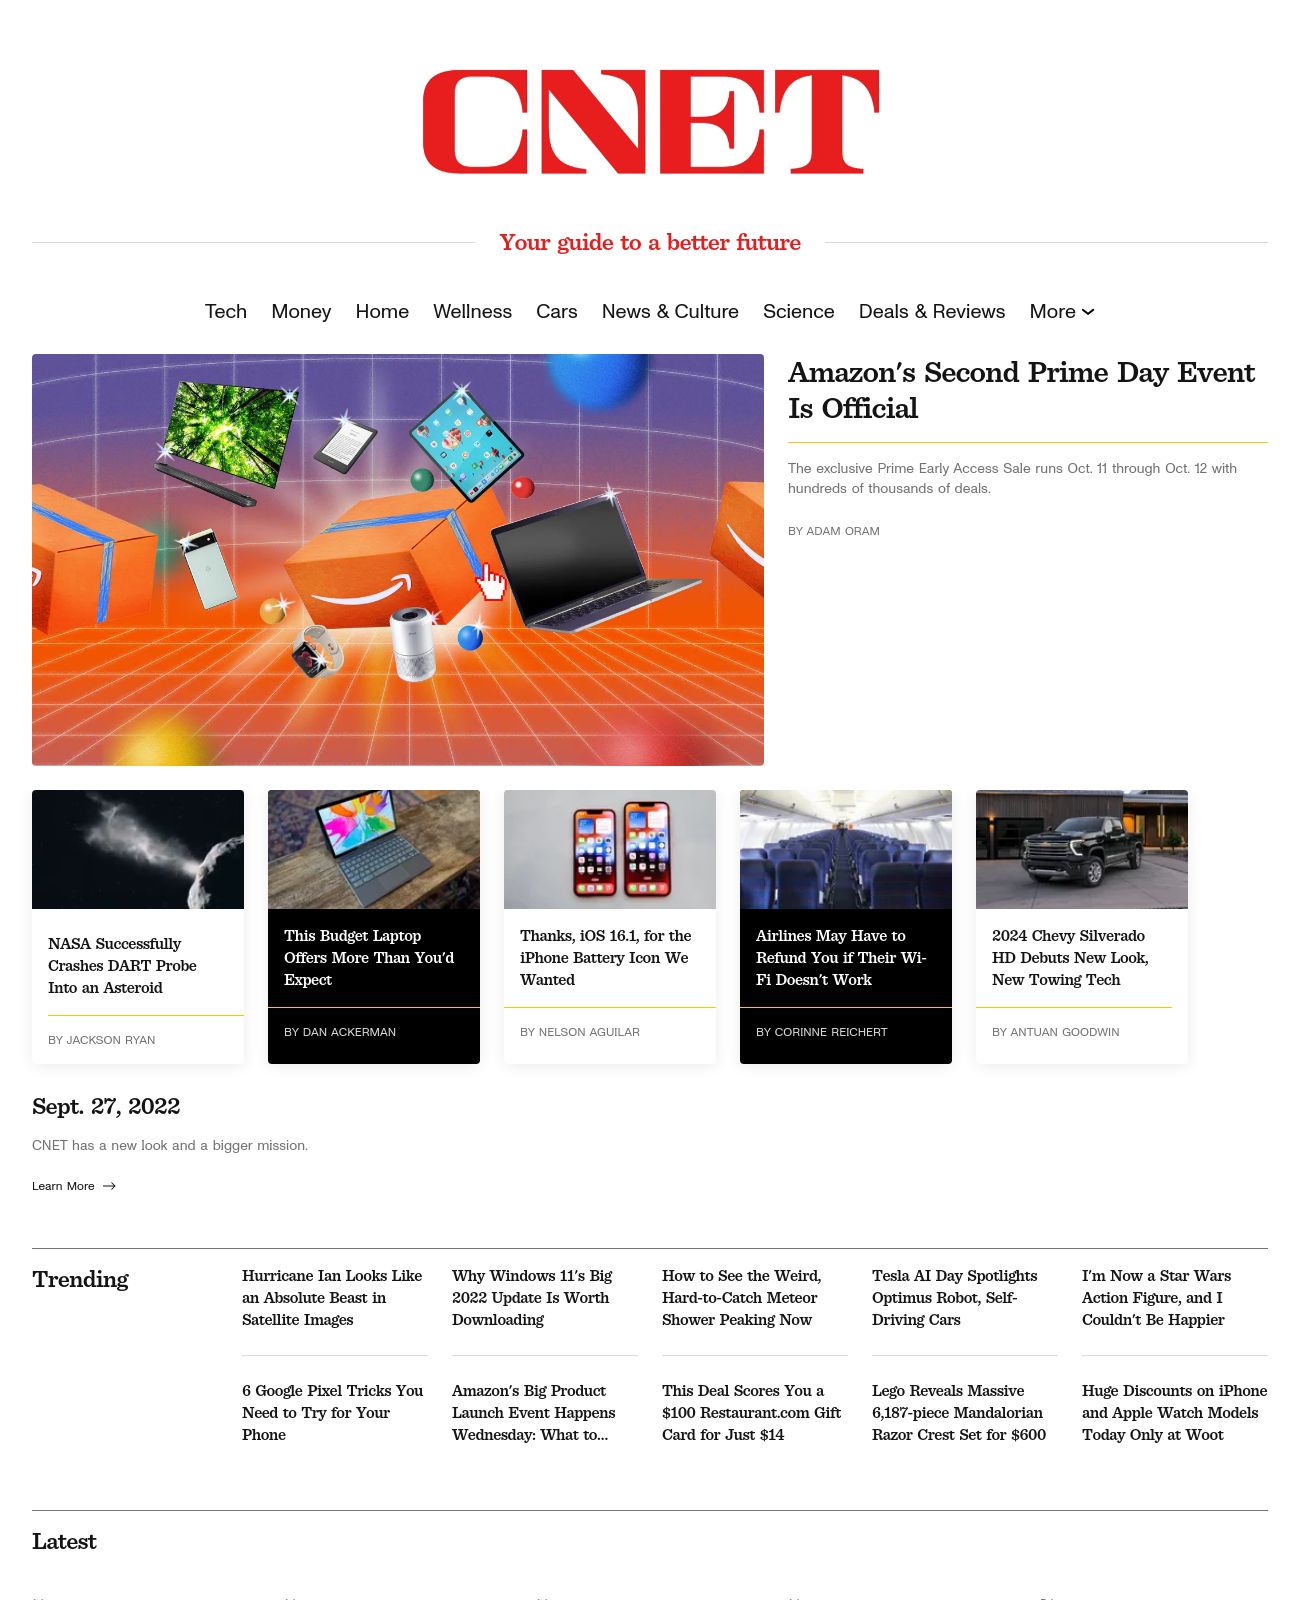 CNET at 2022-09-27 03:57:48-07:00 local time